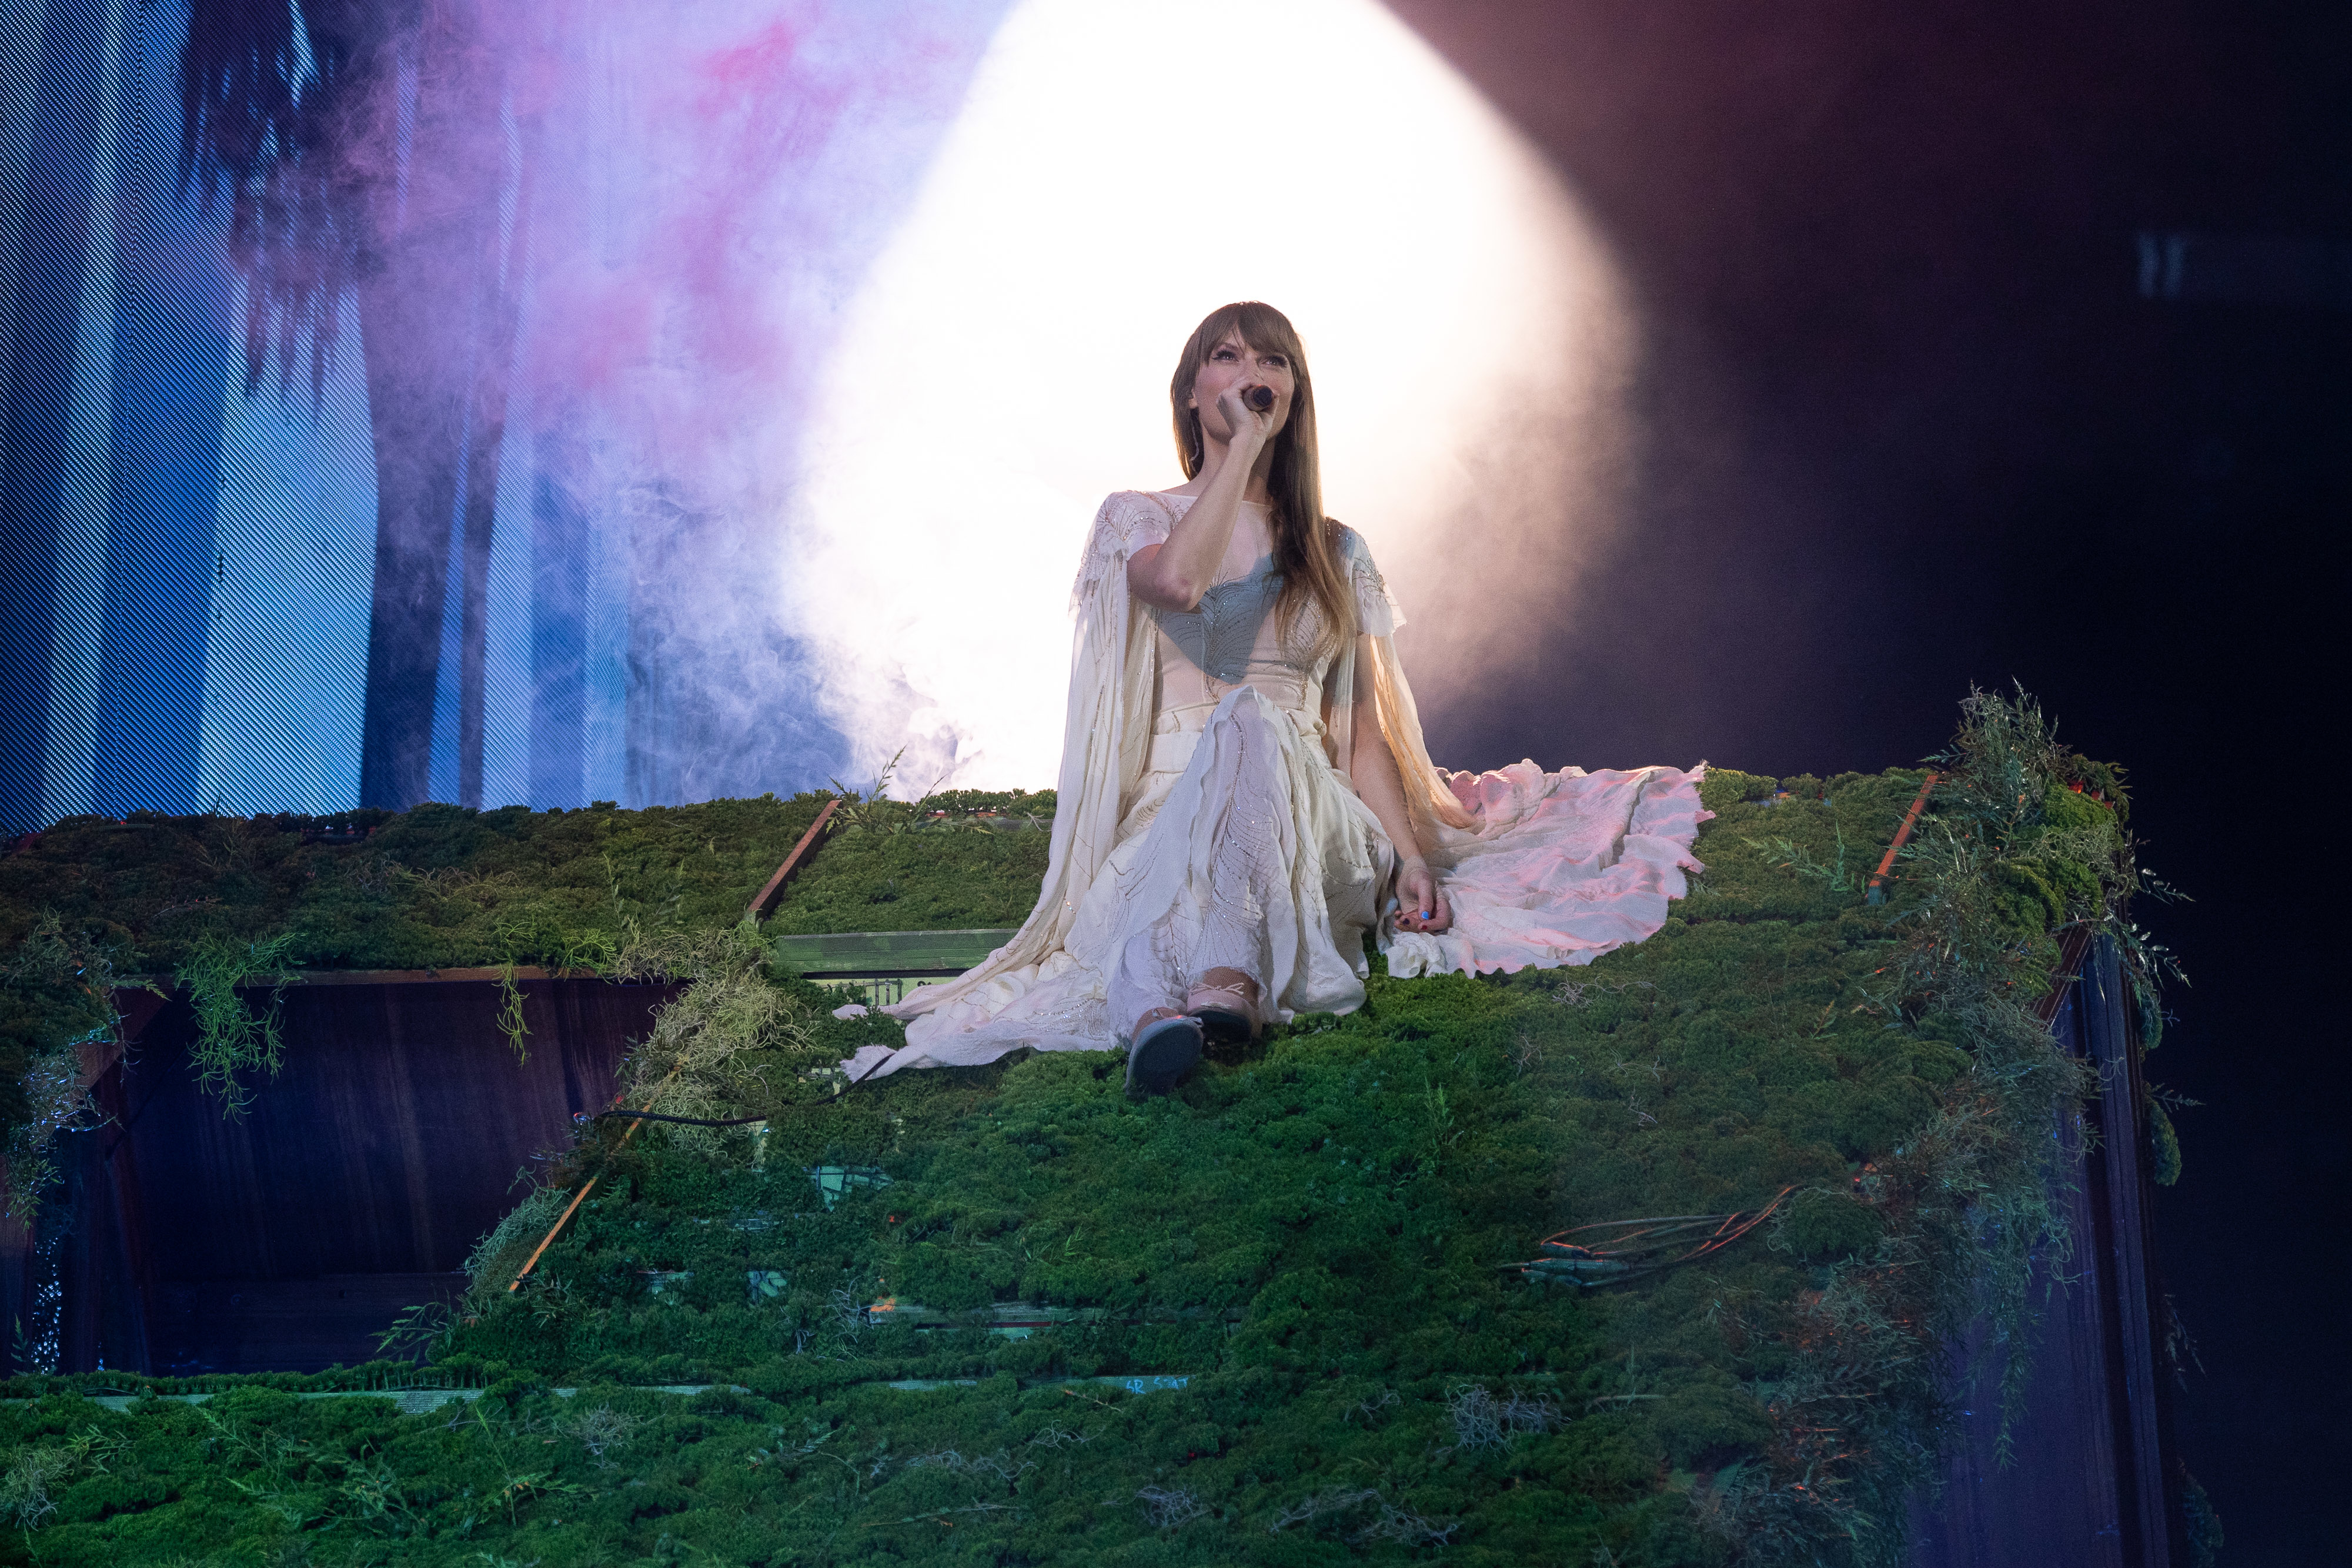 Taylor performing on a verdant roof